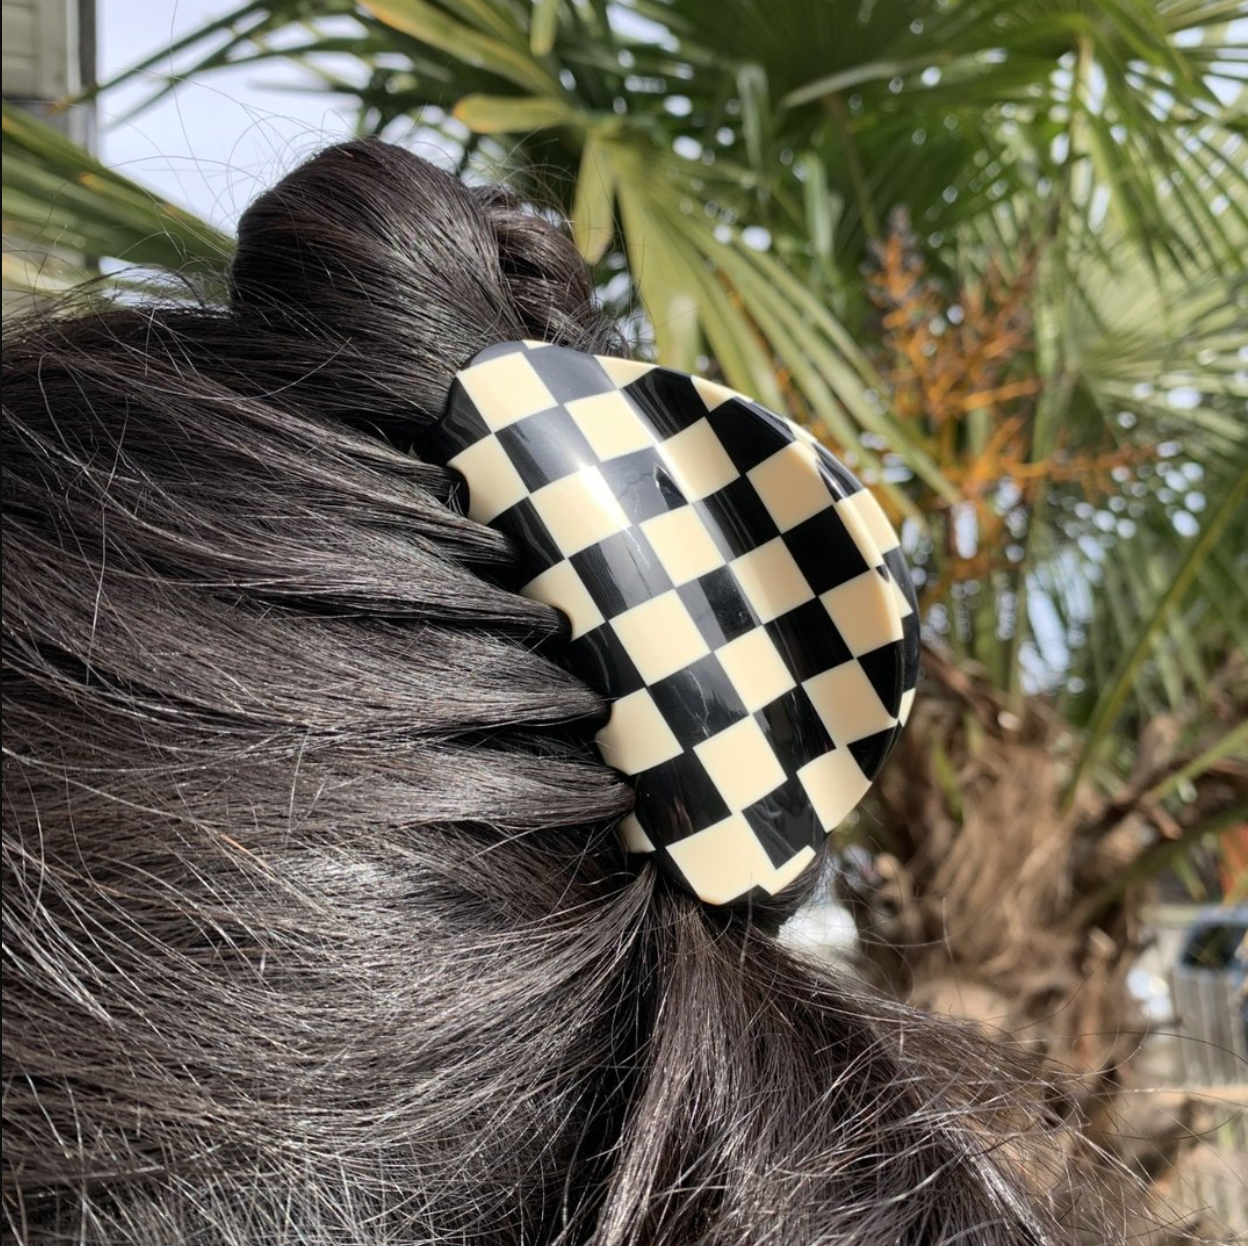 Green Chessboard Hair Claws  by Veronique